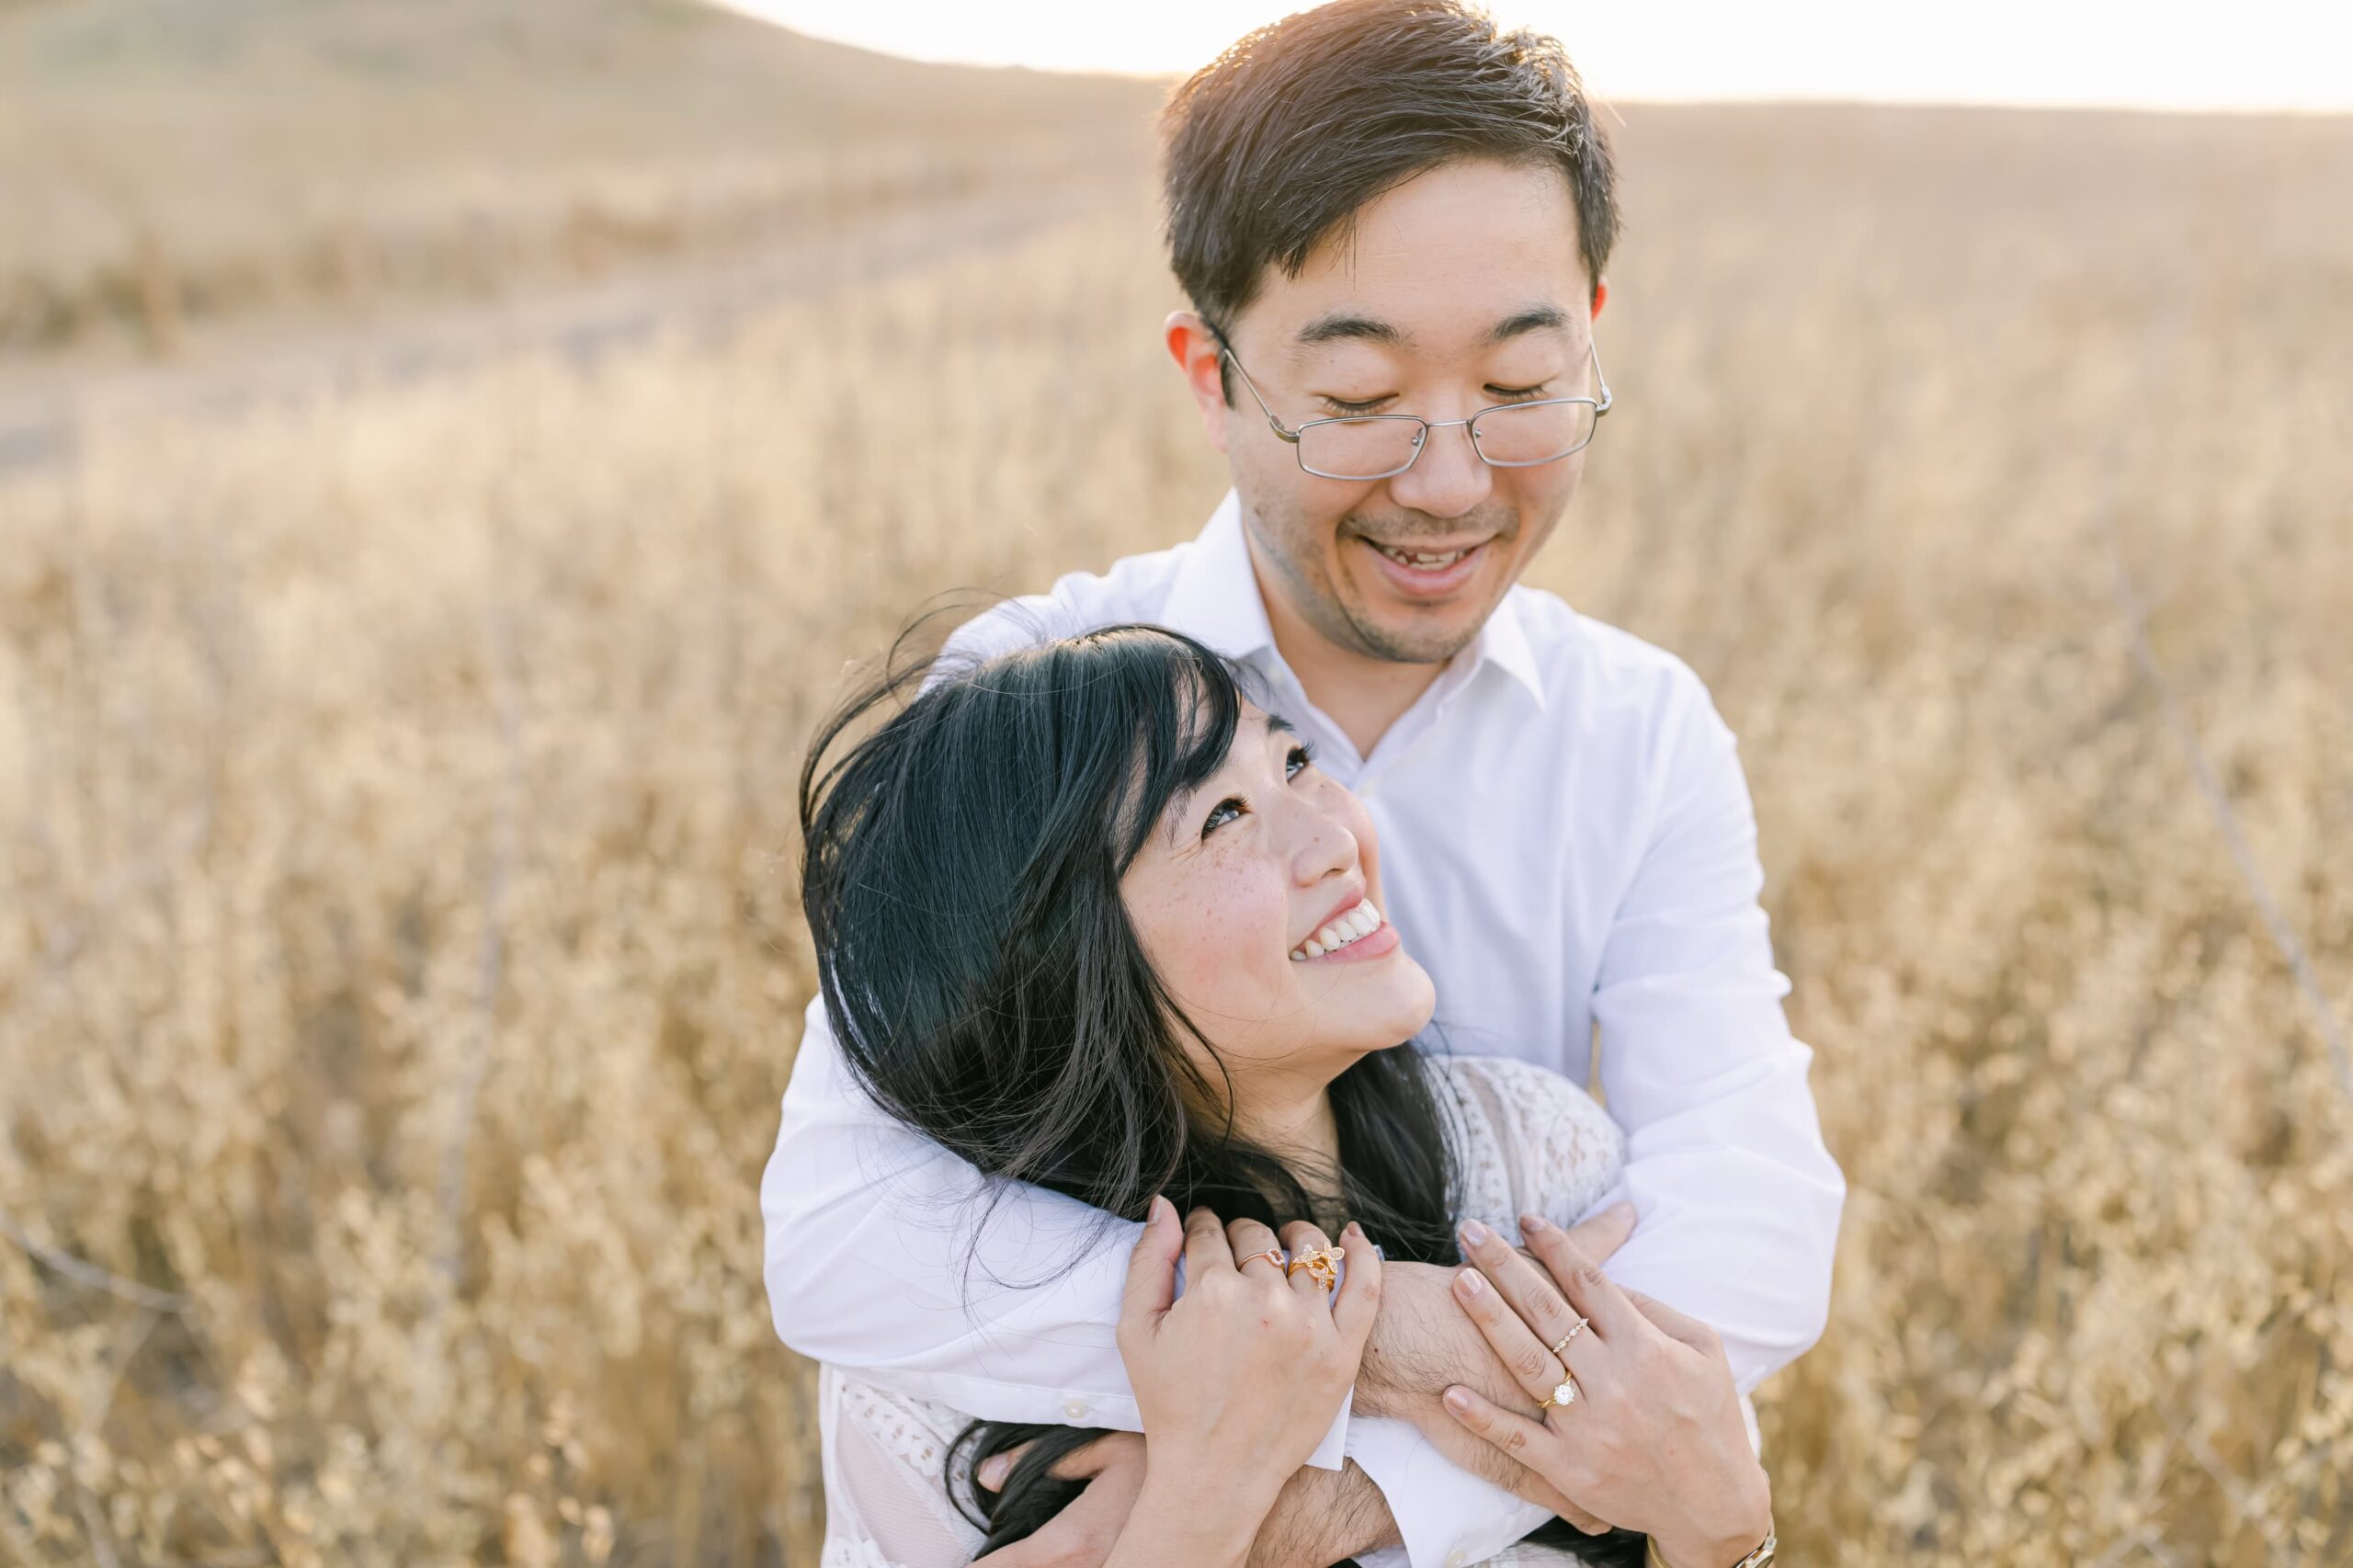 A mom to be leans into the chest and laughs with her husband in a field of golden grass after visiting baby shower venues orange county